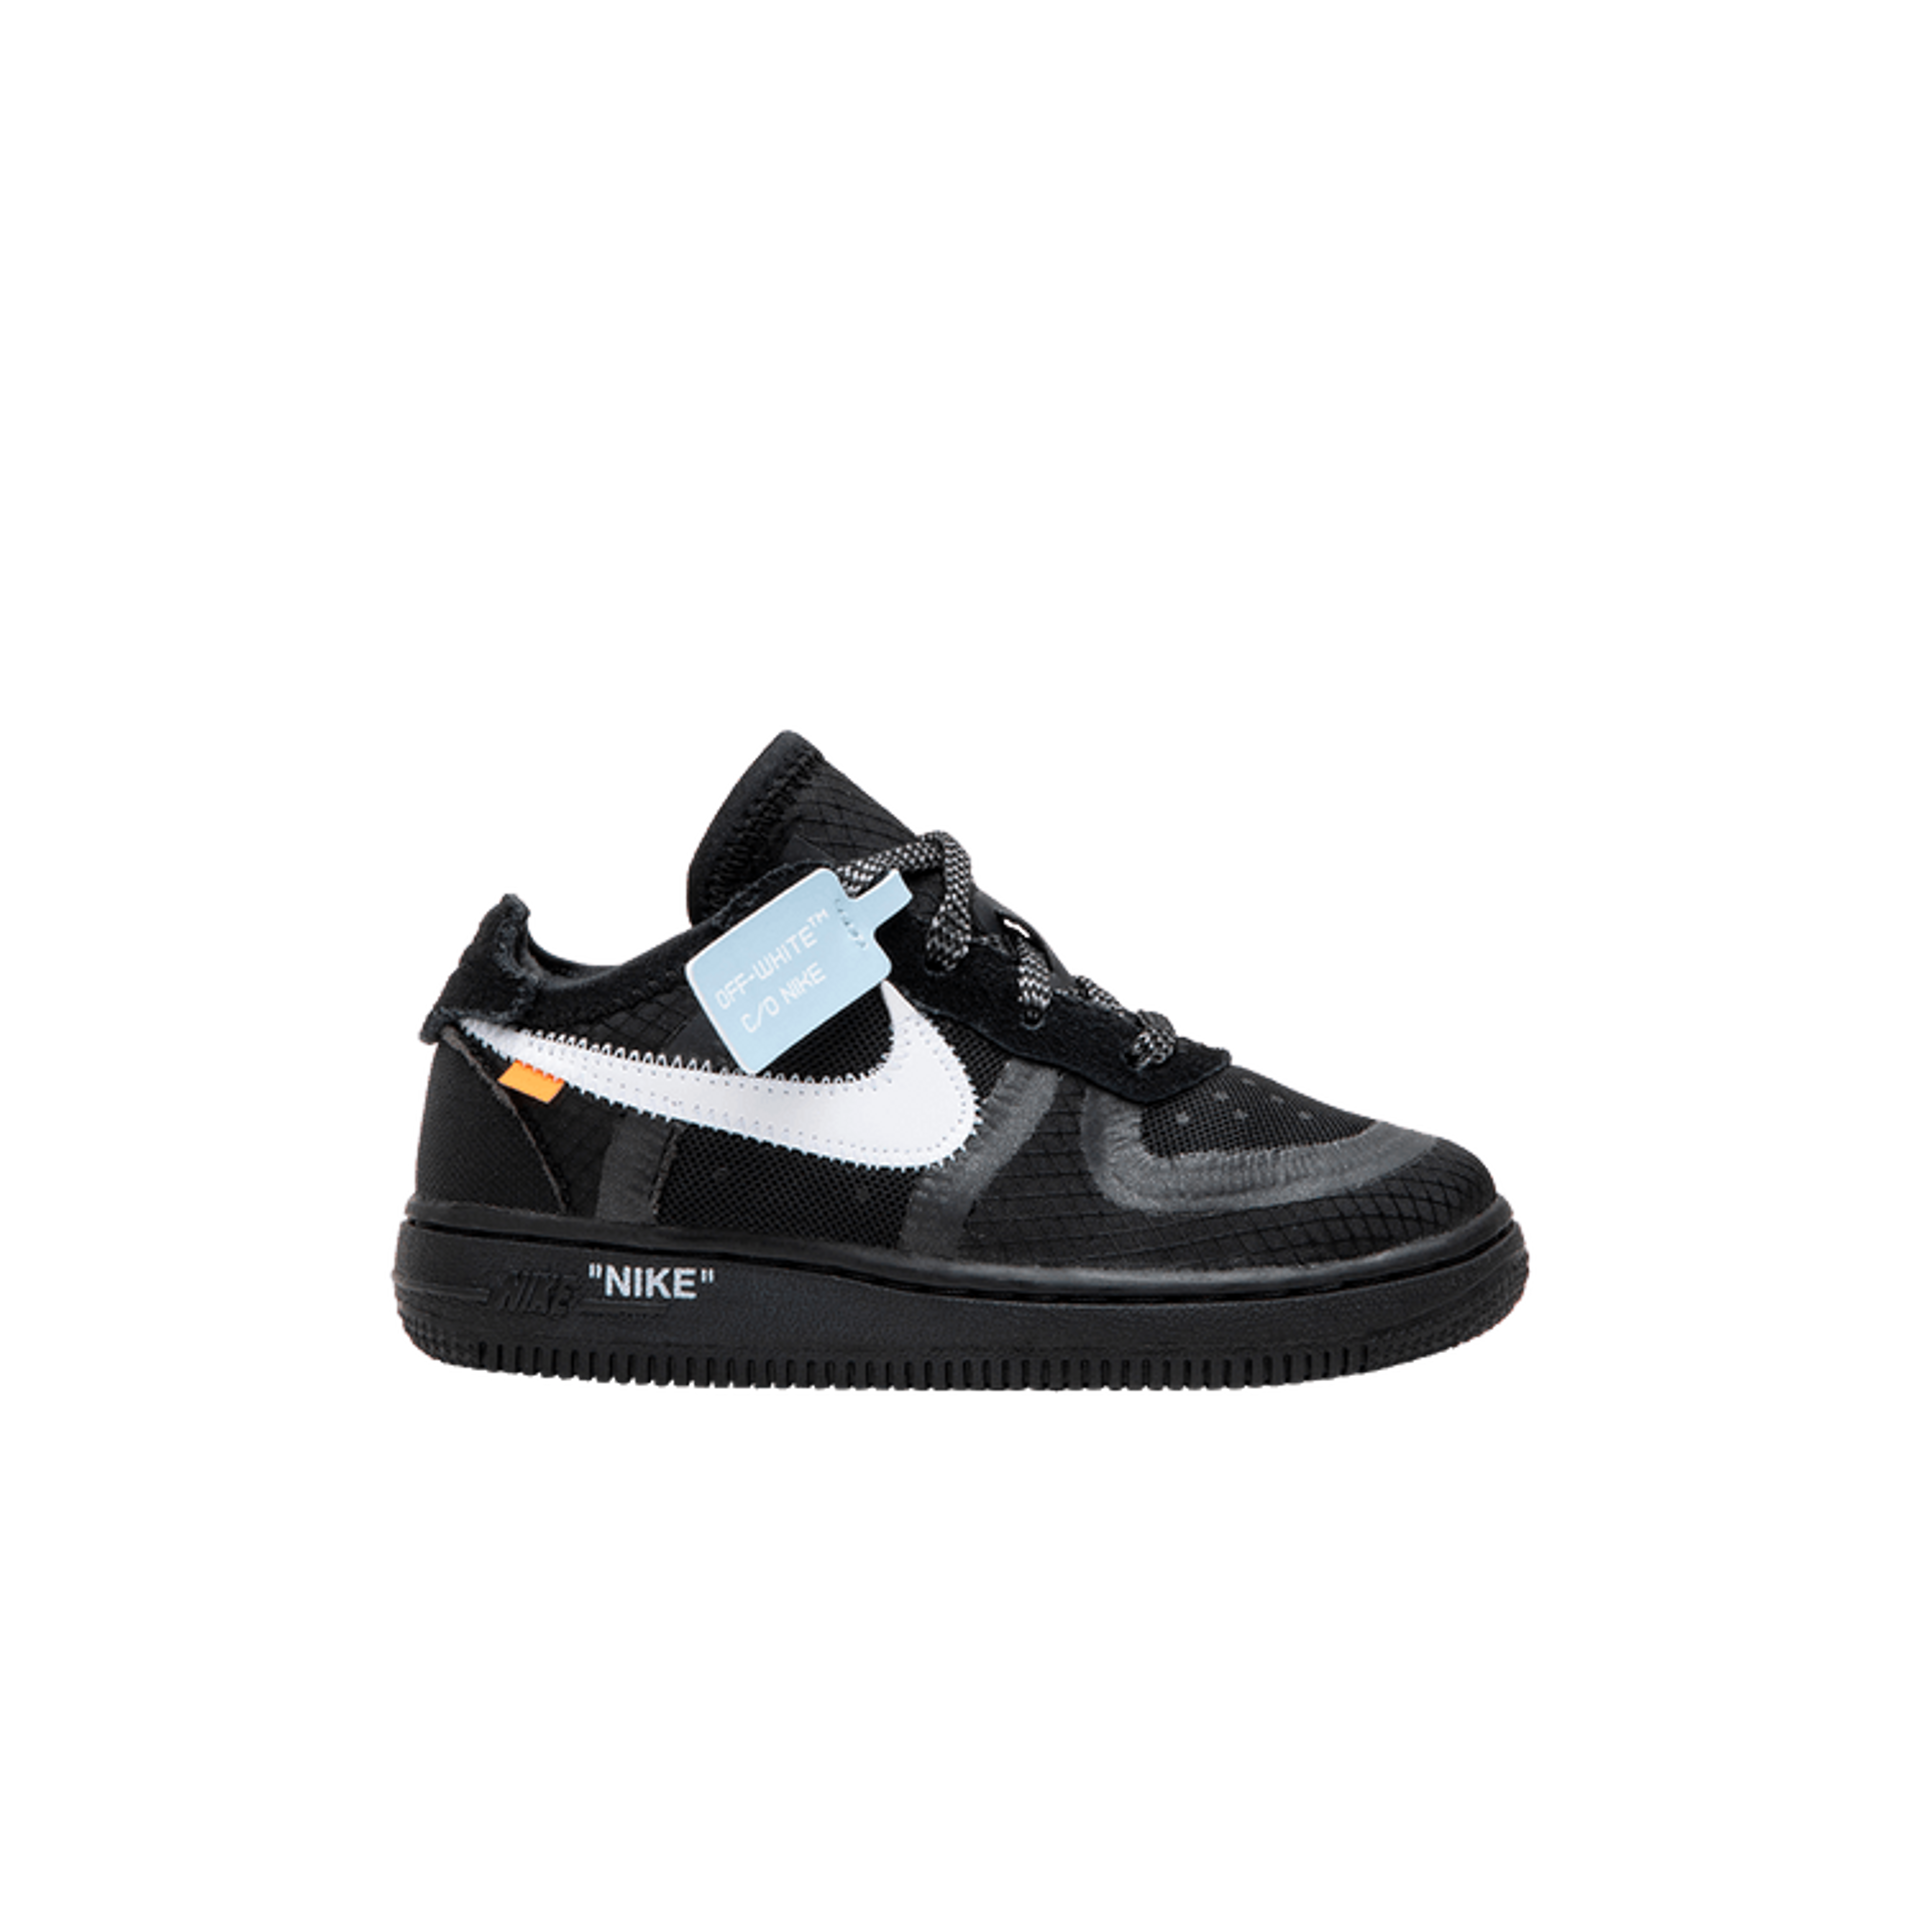 Off-White x Nike Air Force 1 Low TD 'Black'